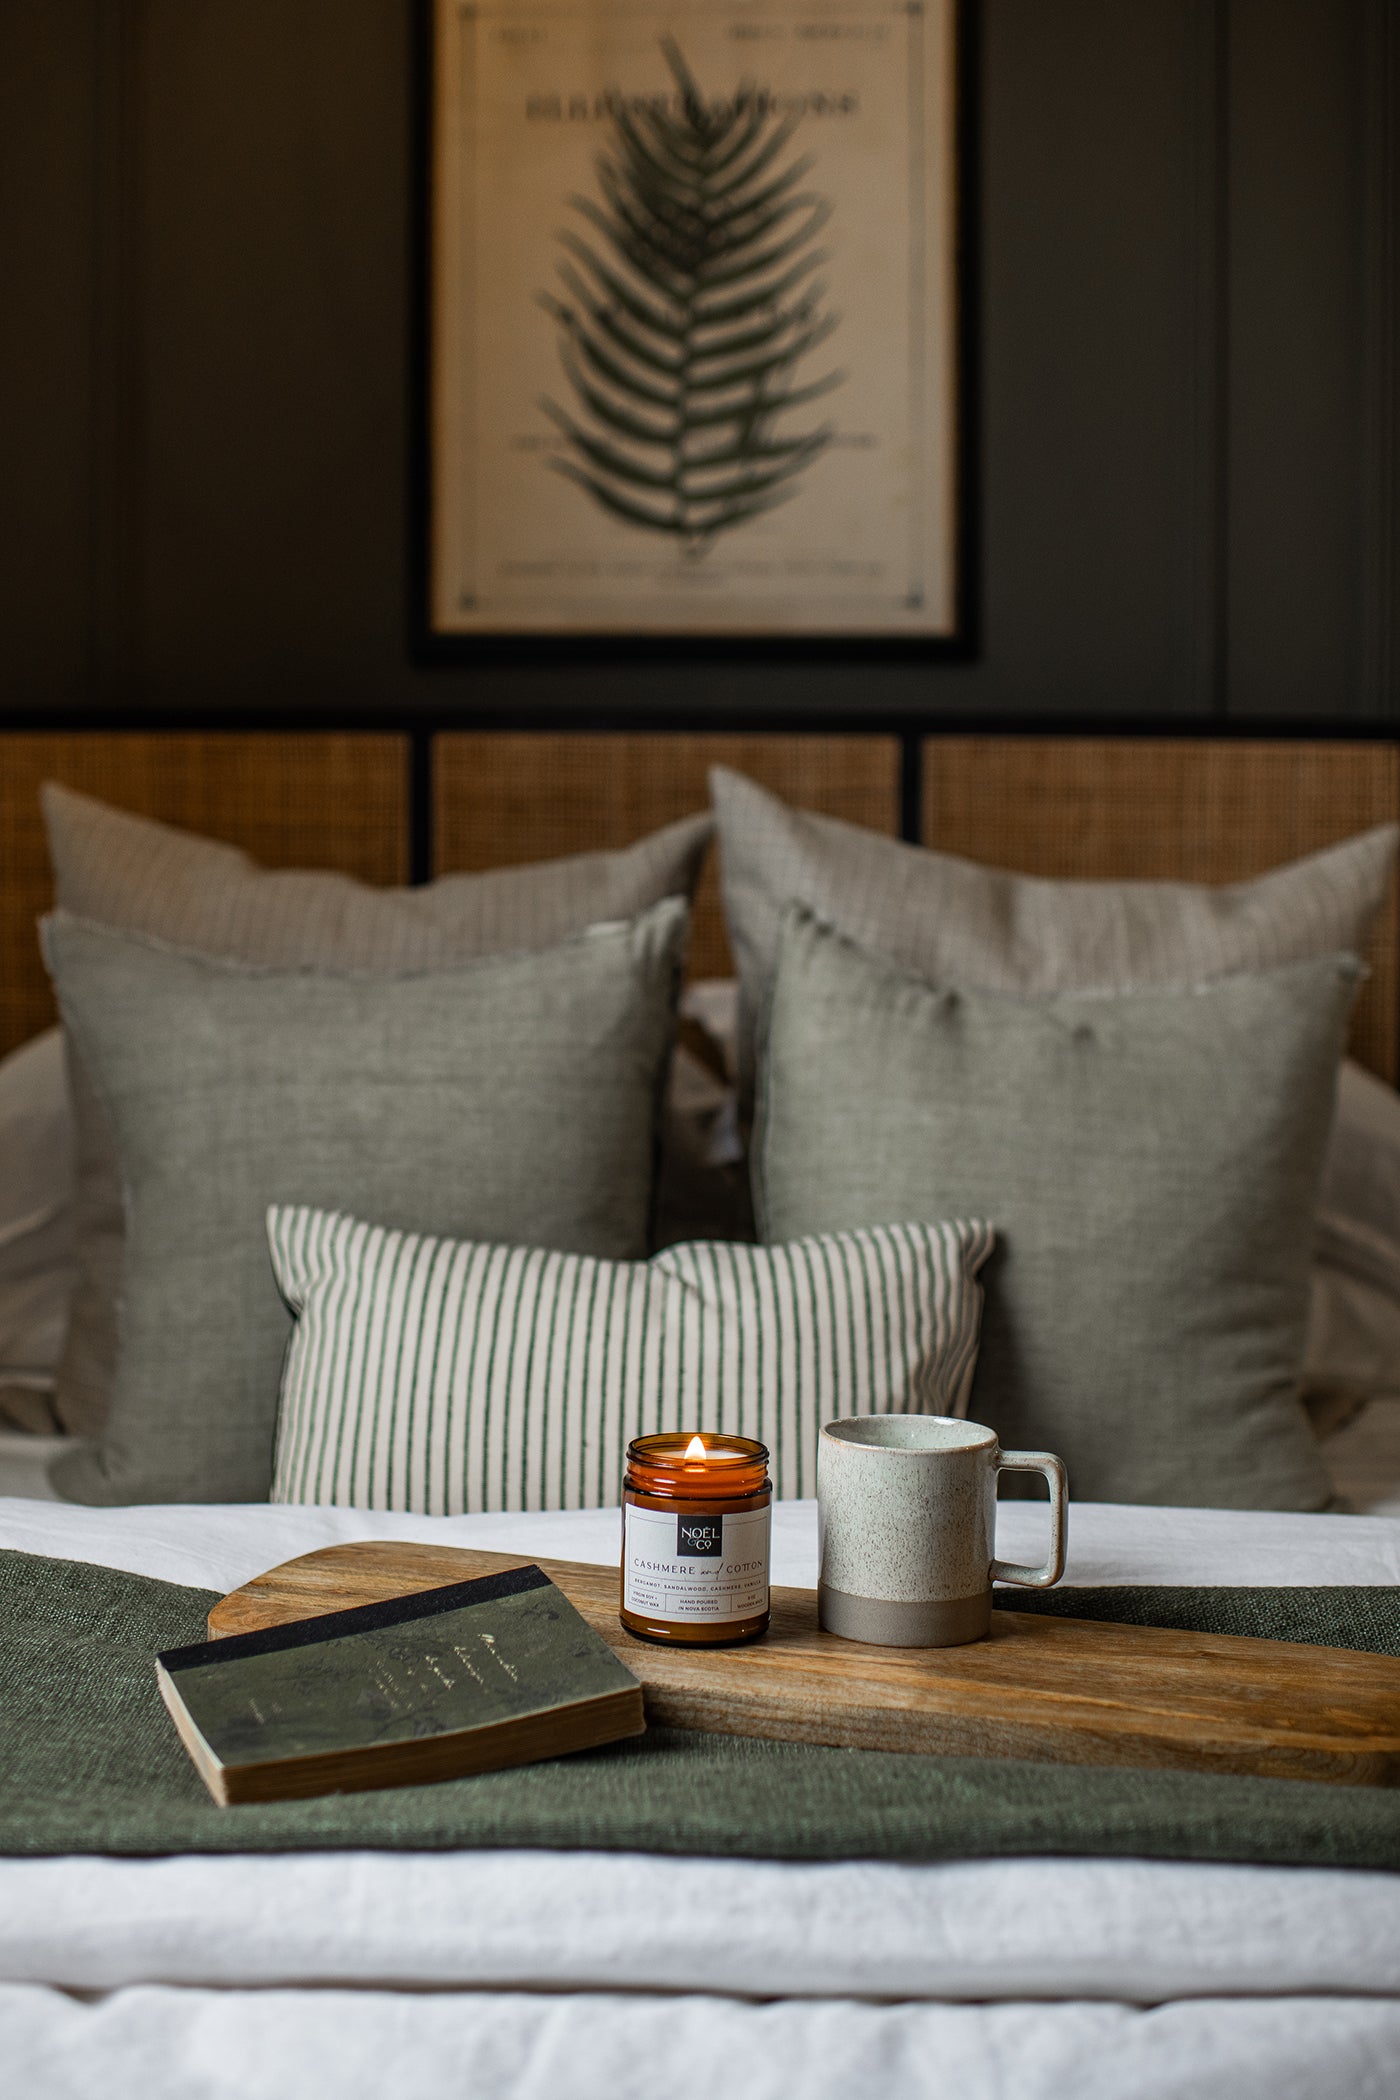 A lit candle in an amber glass jar with a wooden wick on a wooden slab next to a book and a mug.